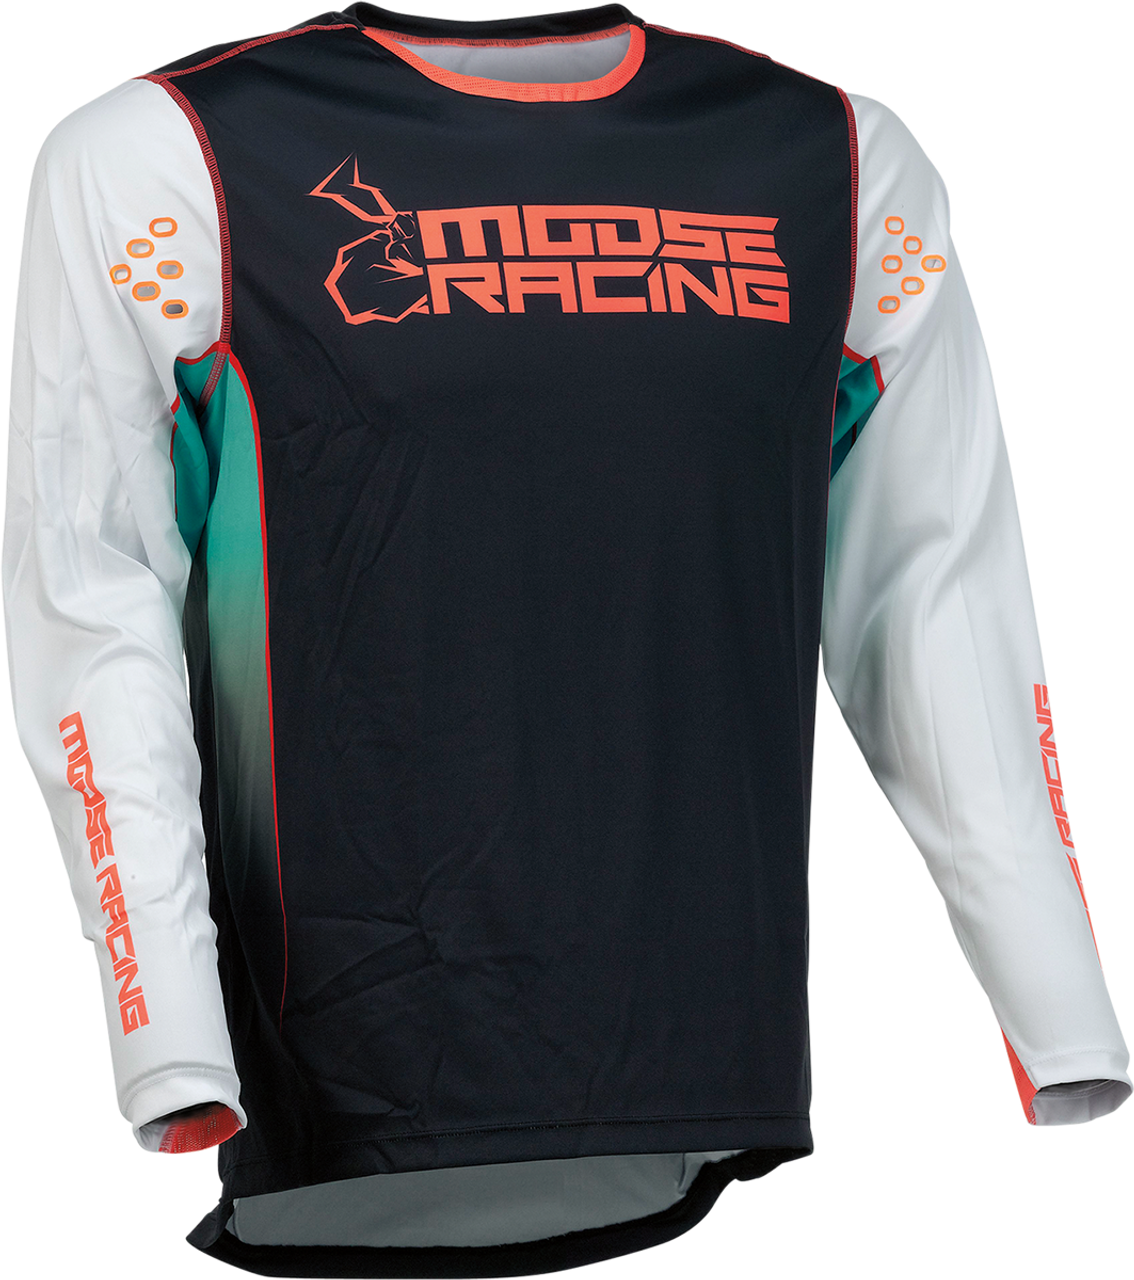 MOOSE RACING Agroid Jersey - Teal/Black - Small 2910-6994